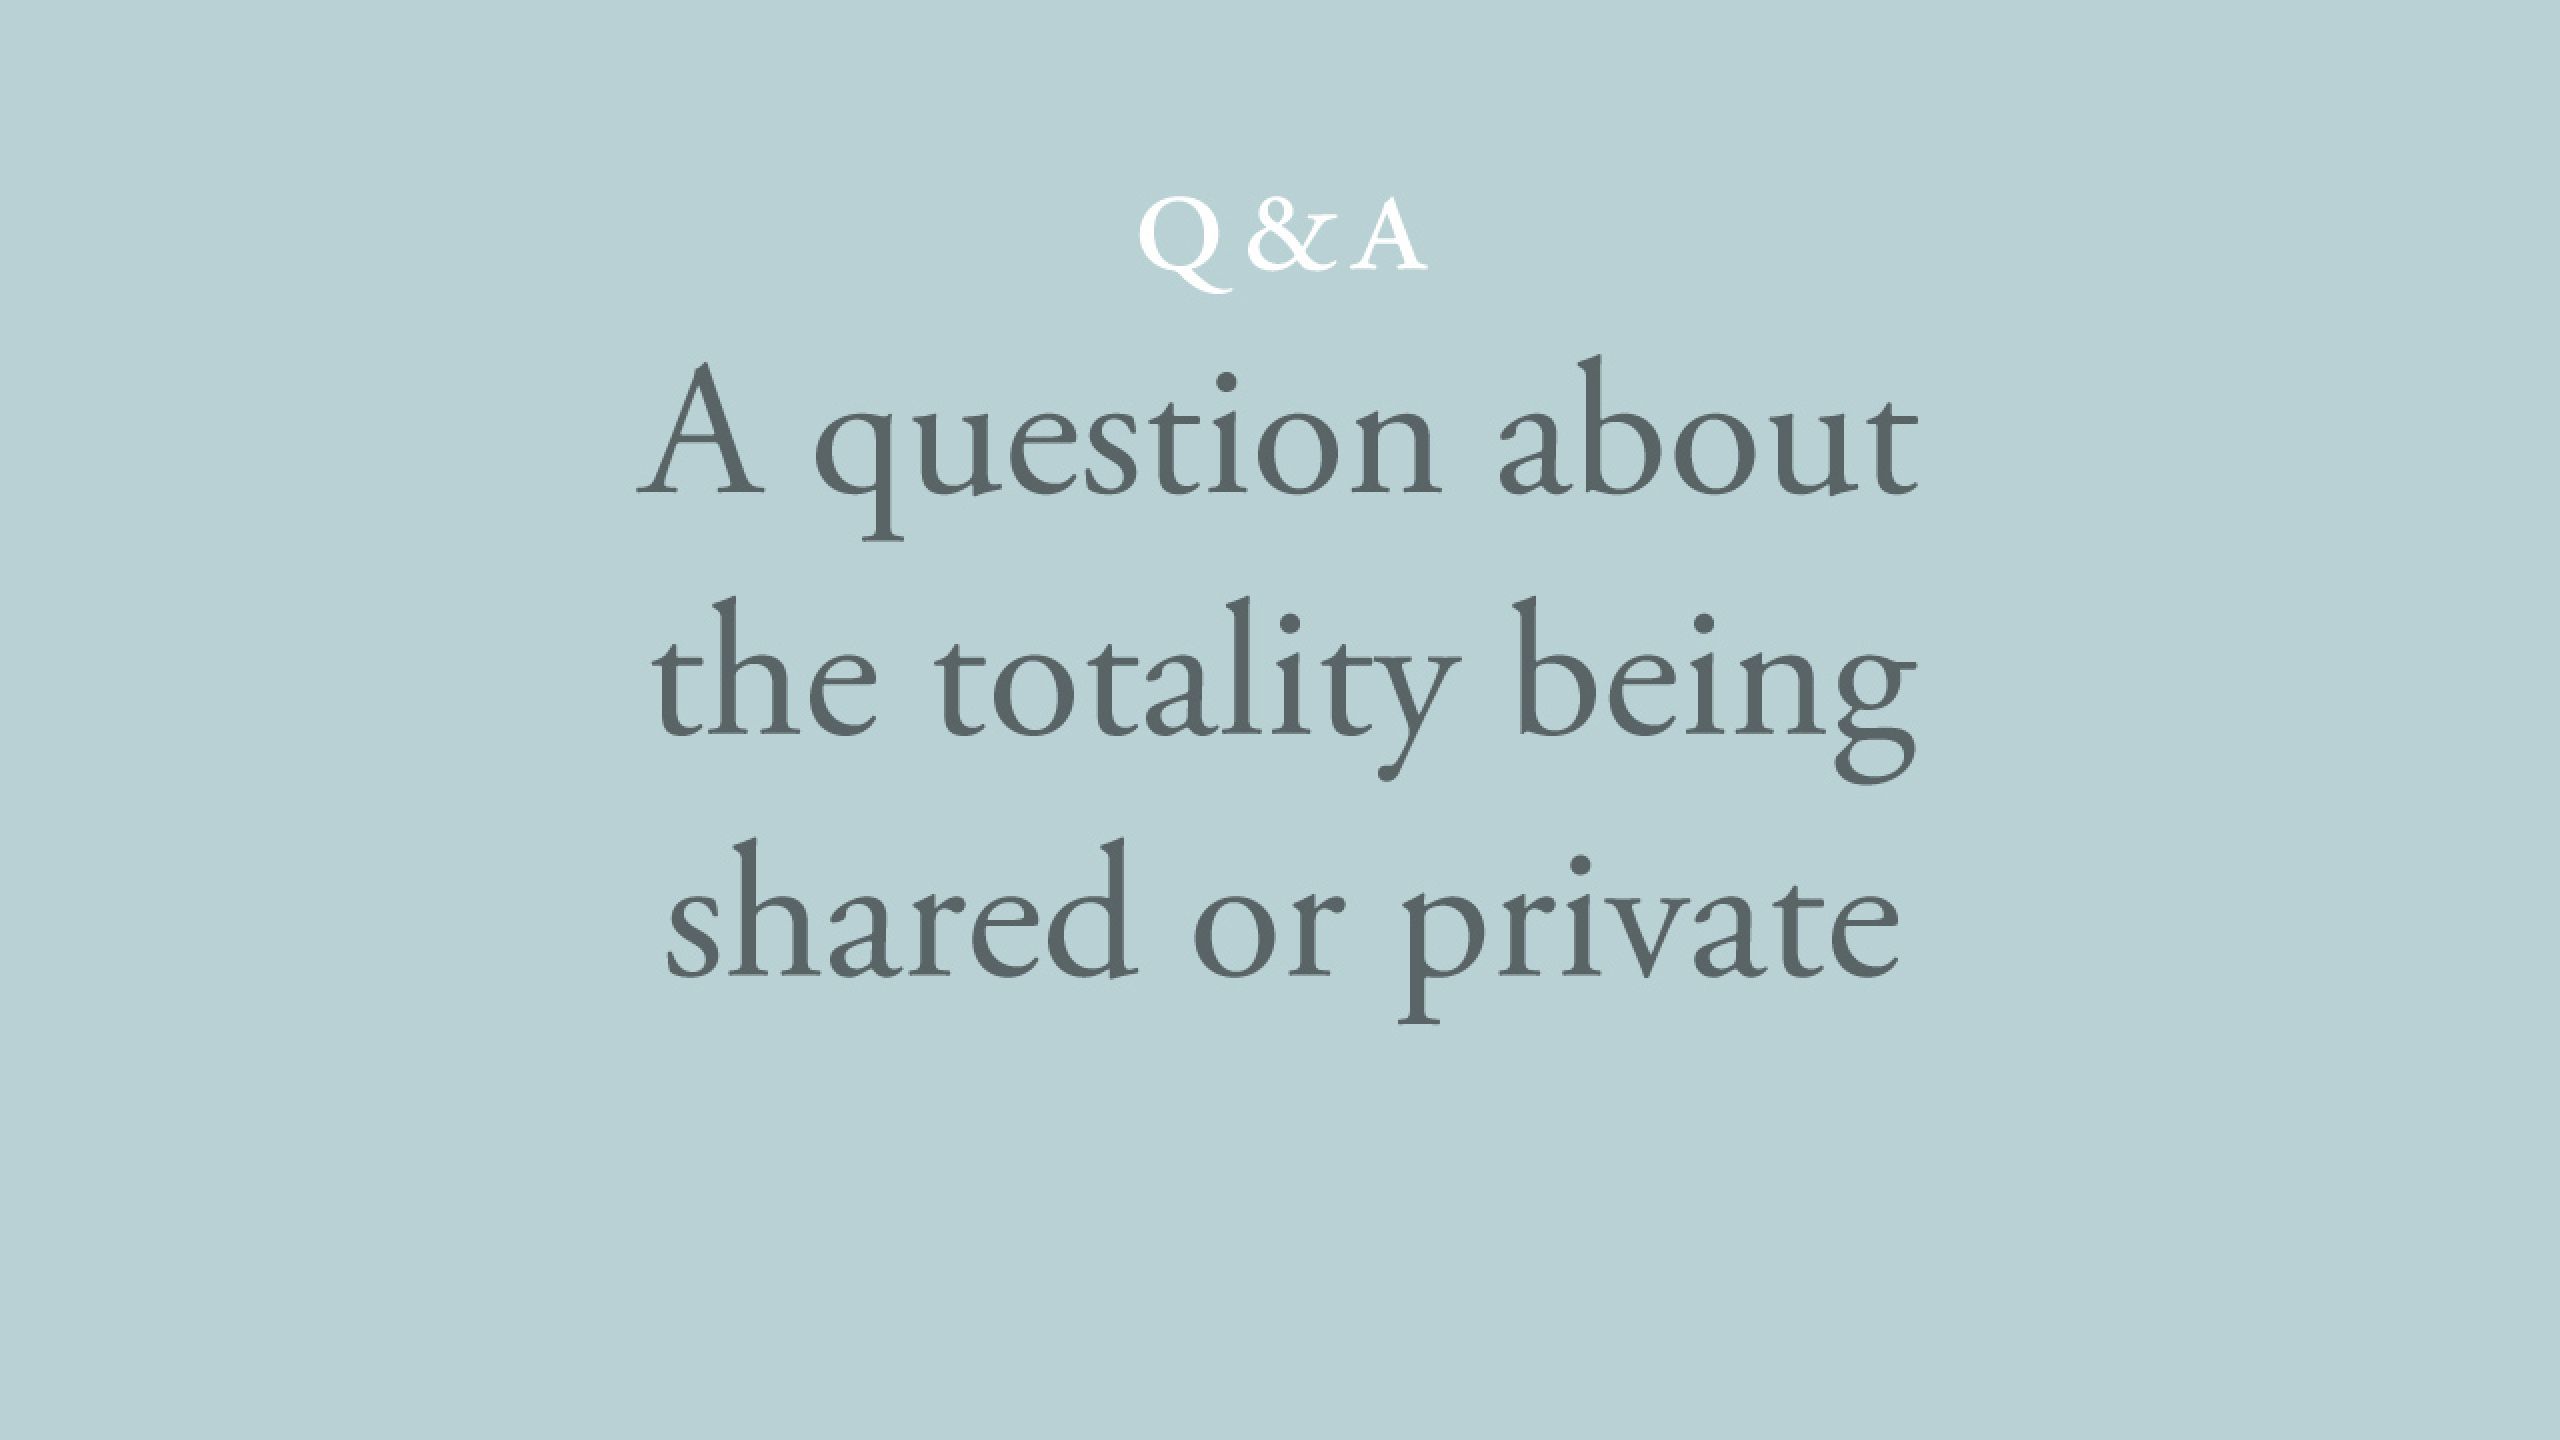 When you refer to the totality, is it private or shared?